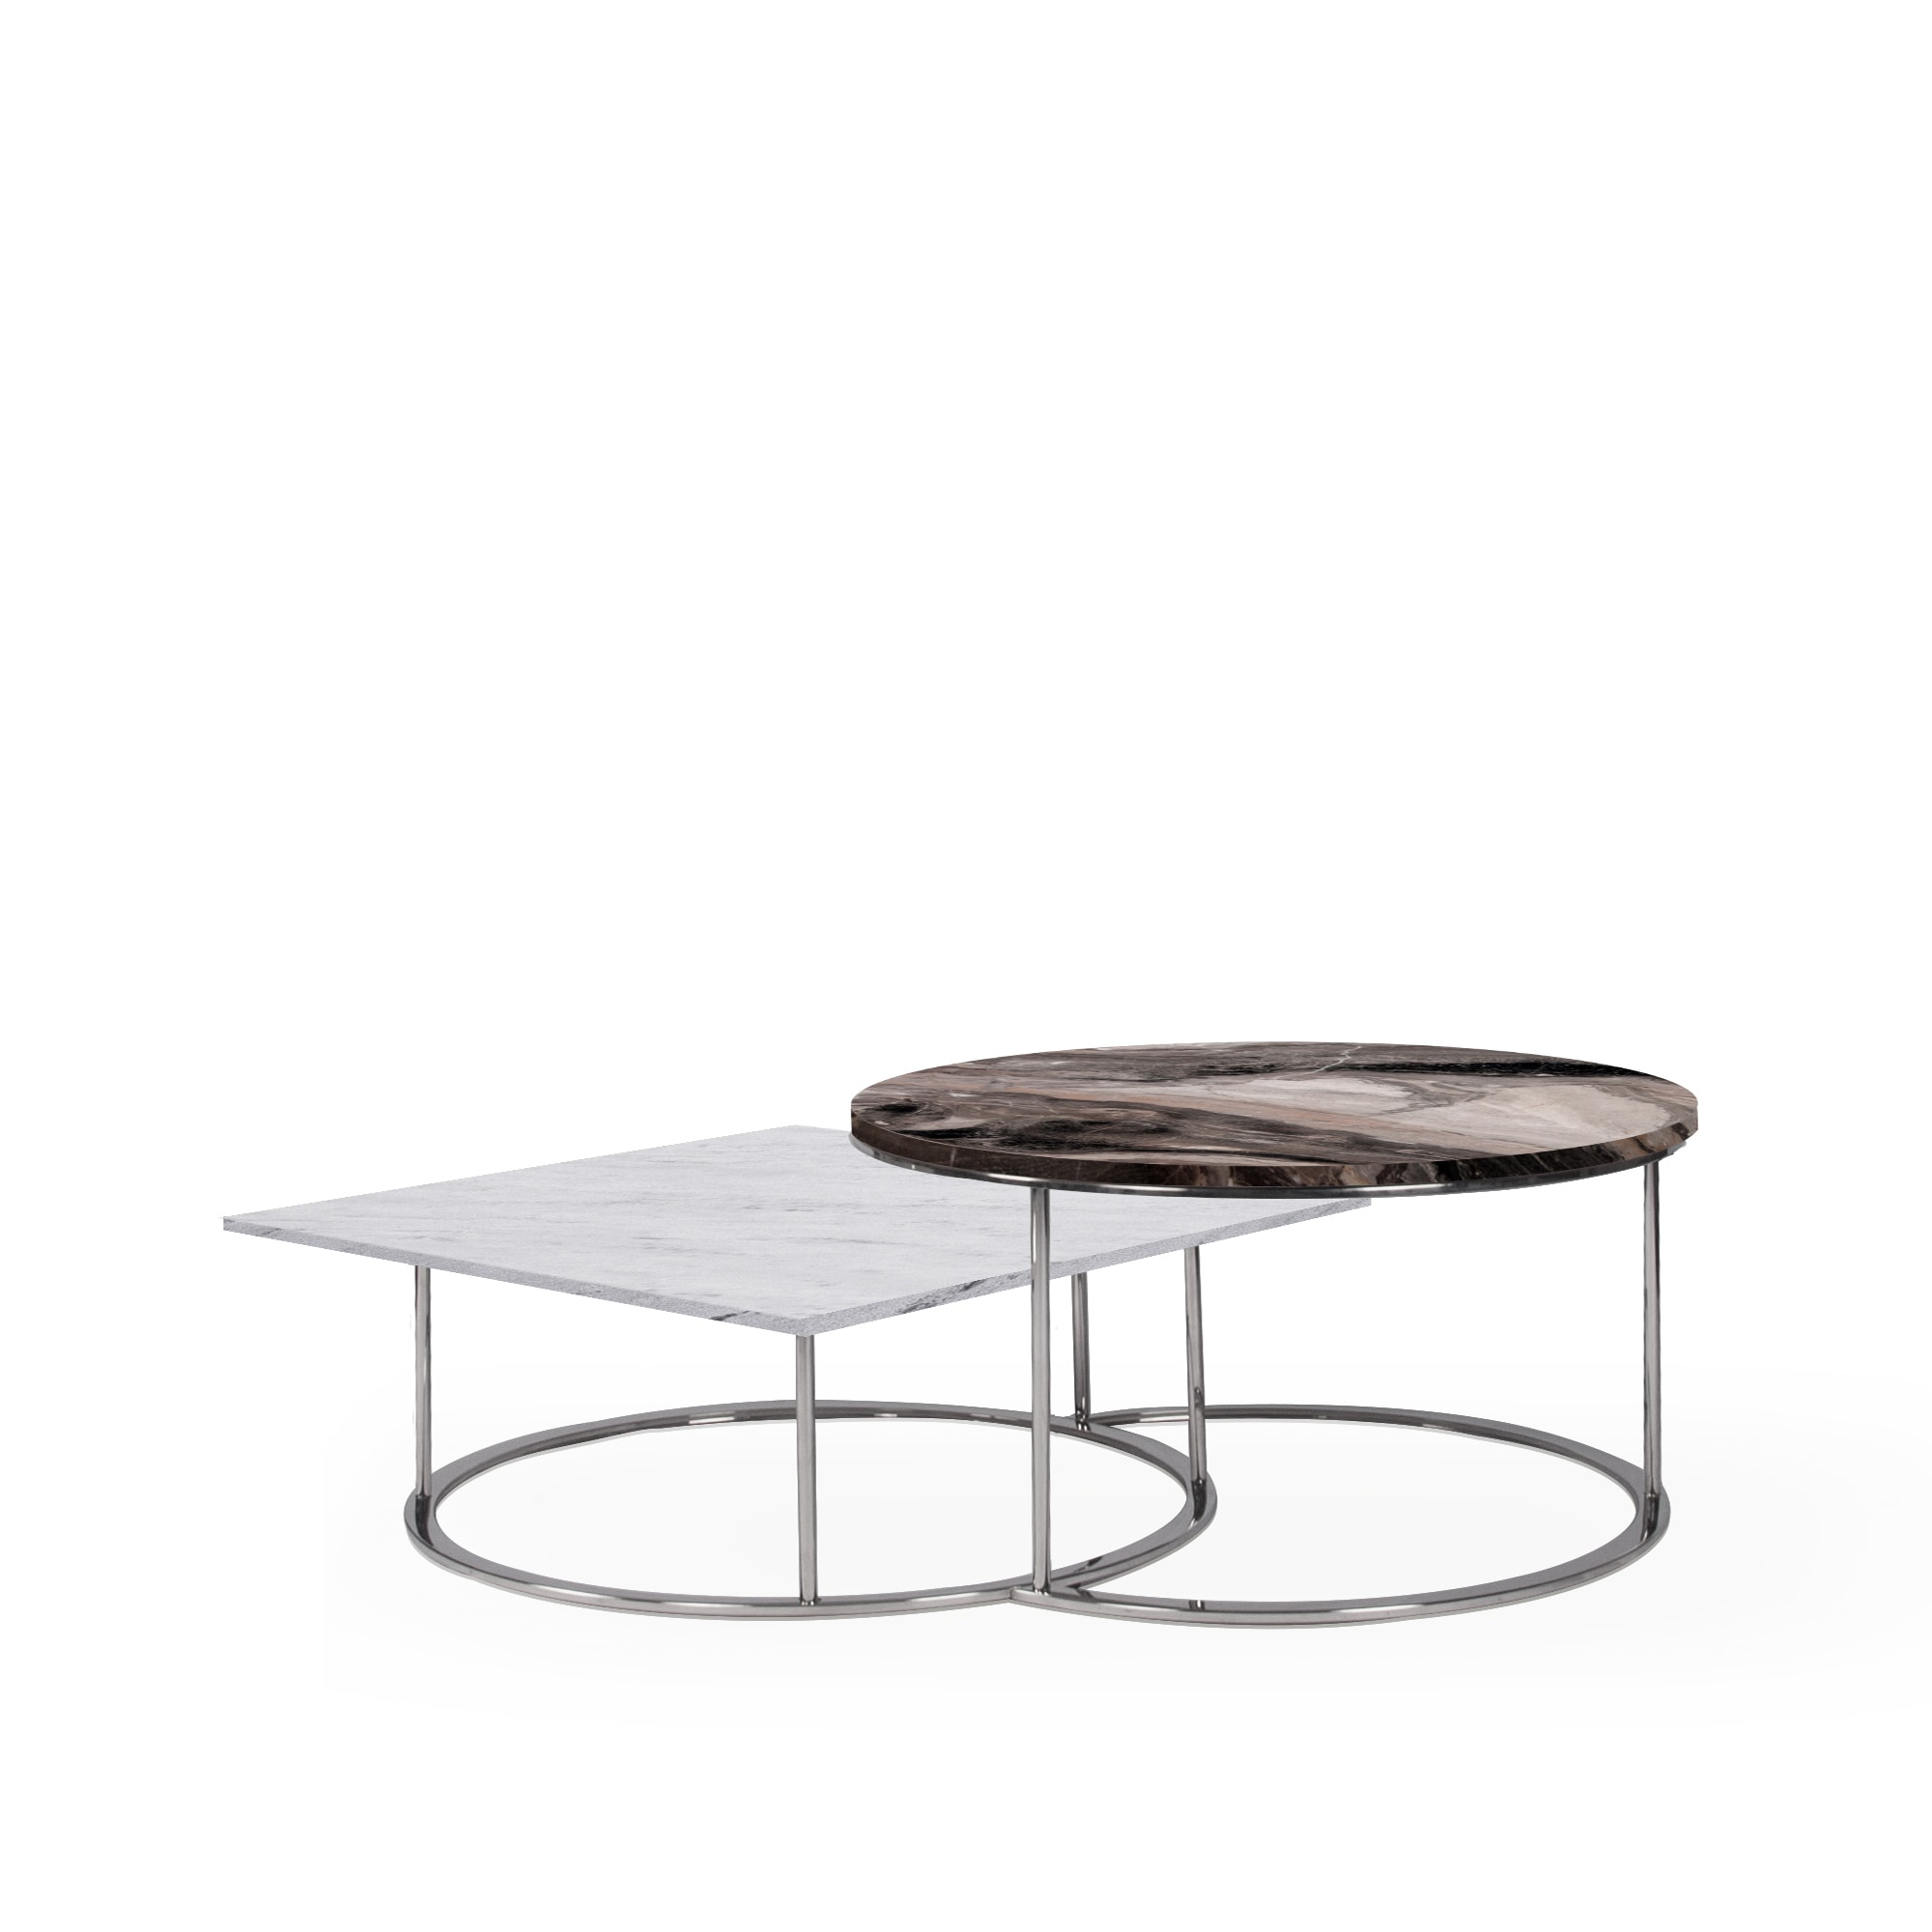 EXETER C | Decasa Marble Marble Dining Table